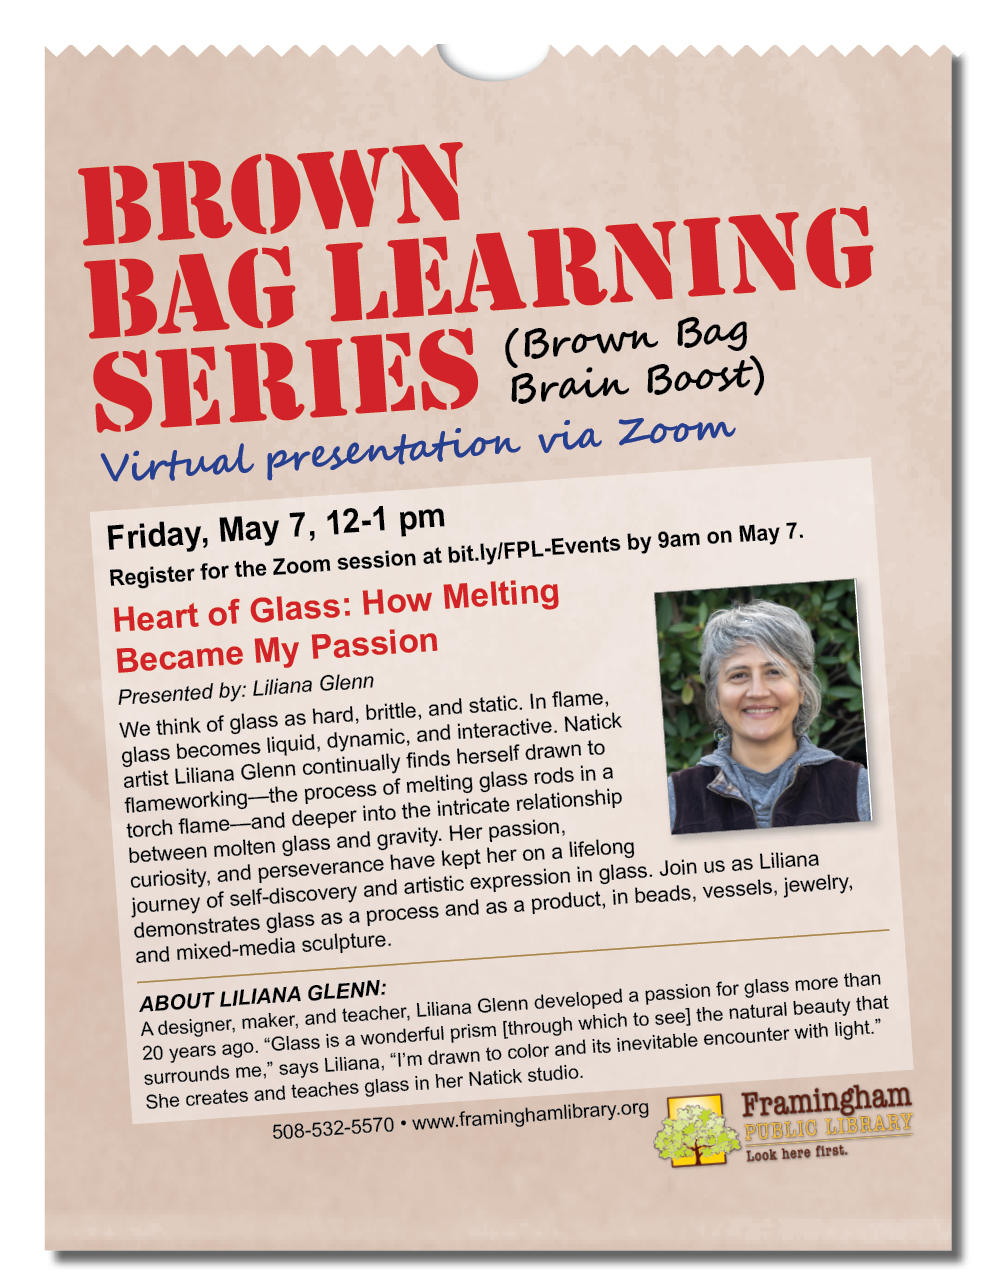 Brown Bag Learning Series: Heart of Glass: How Melting Became My Passion thumbnail Photo